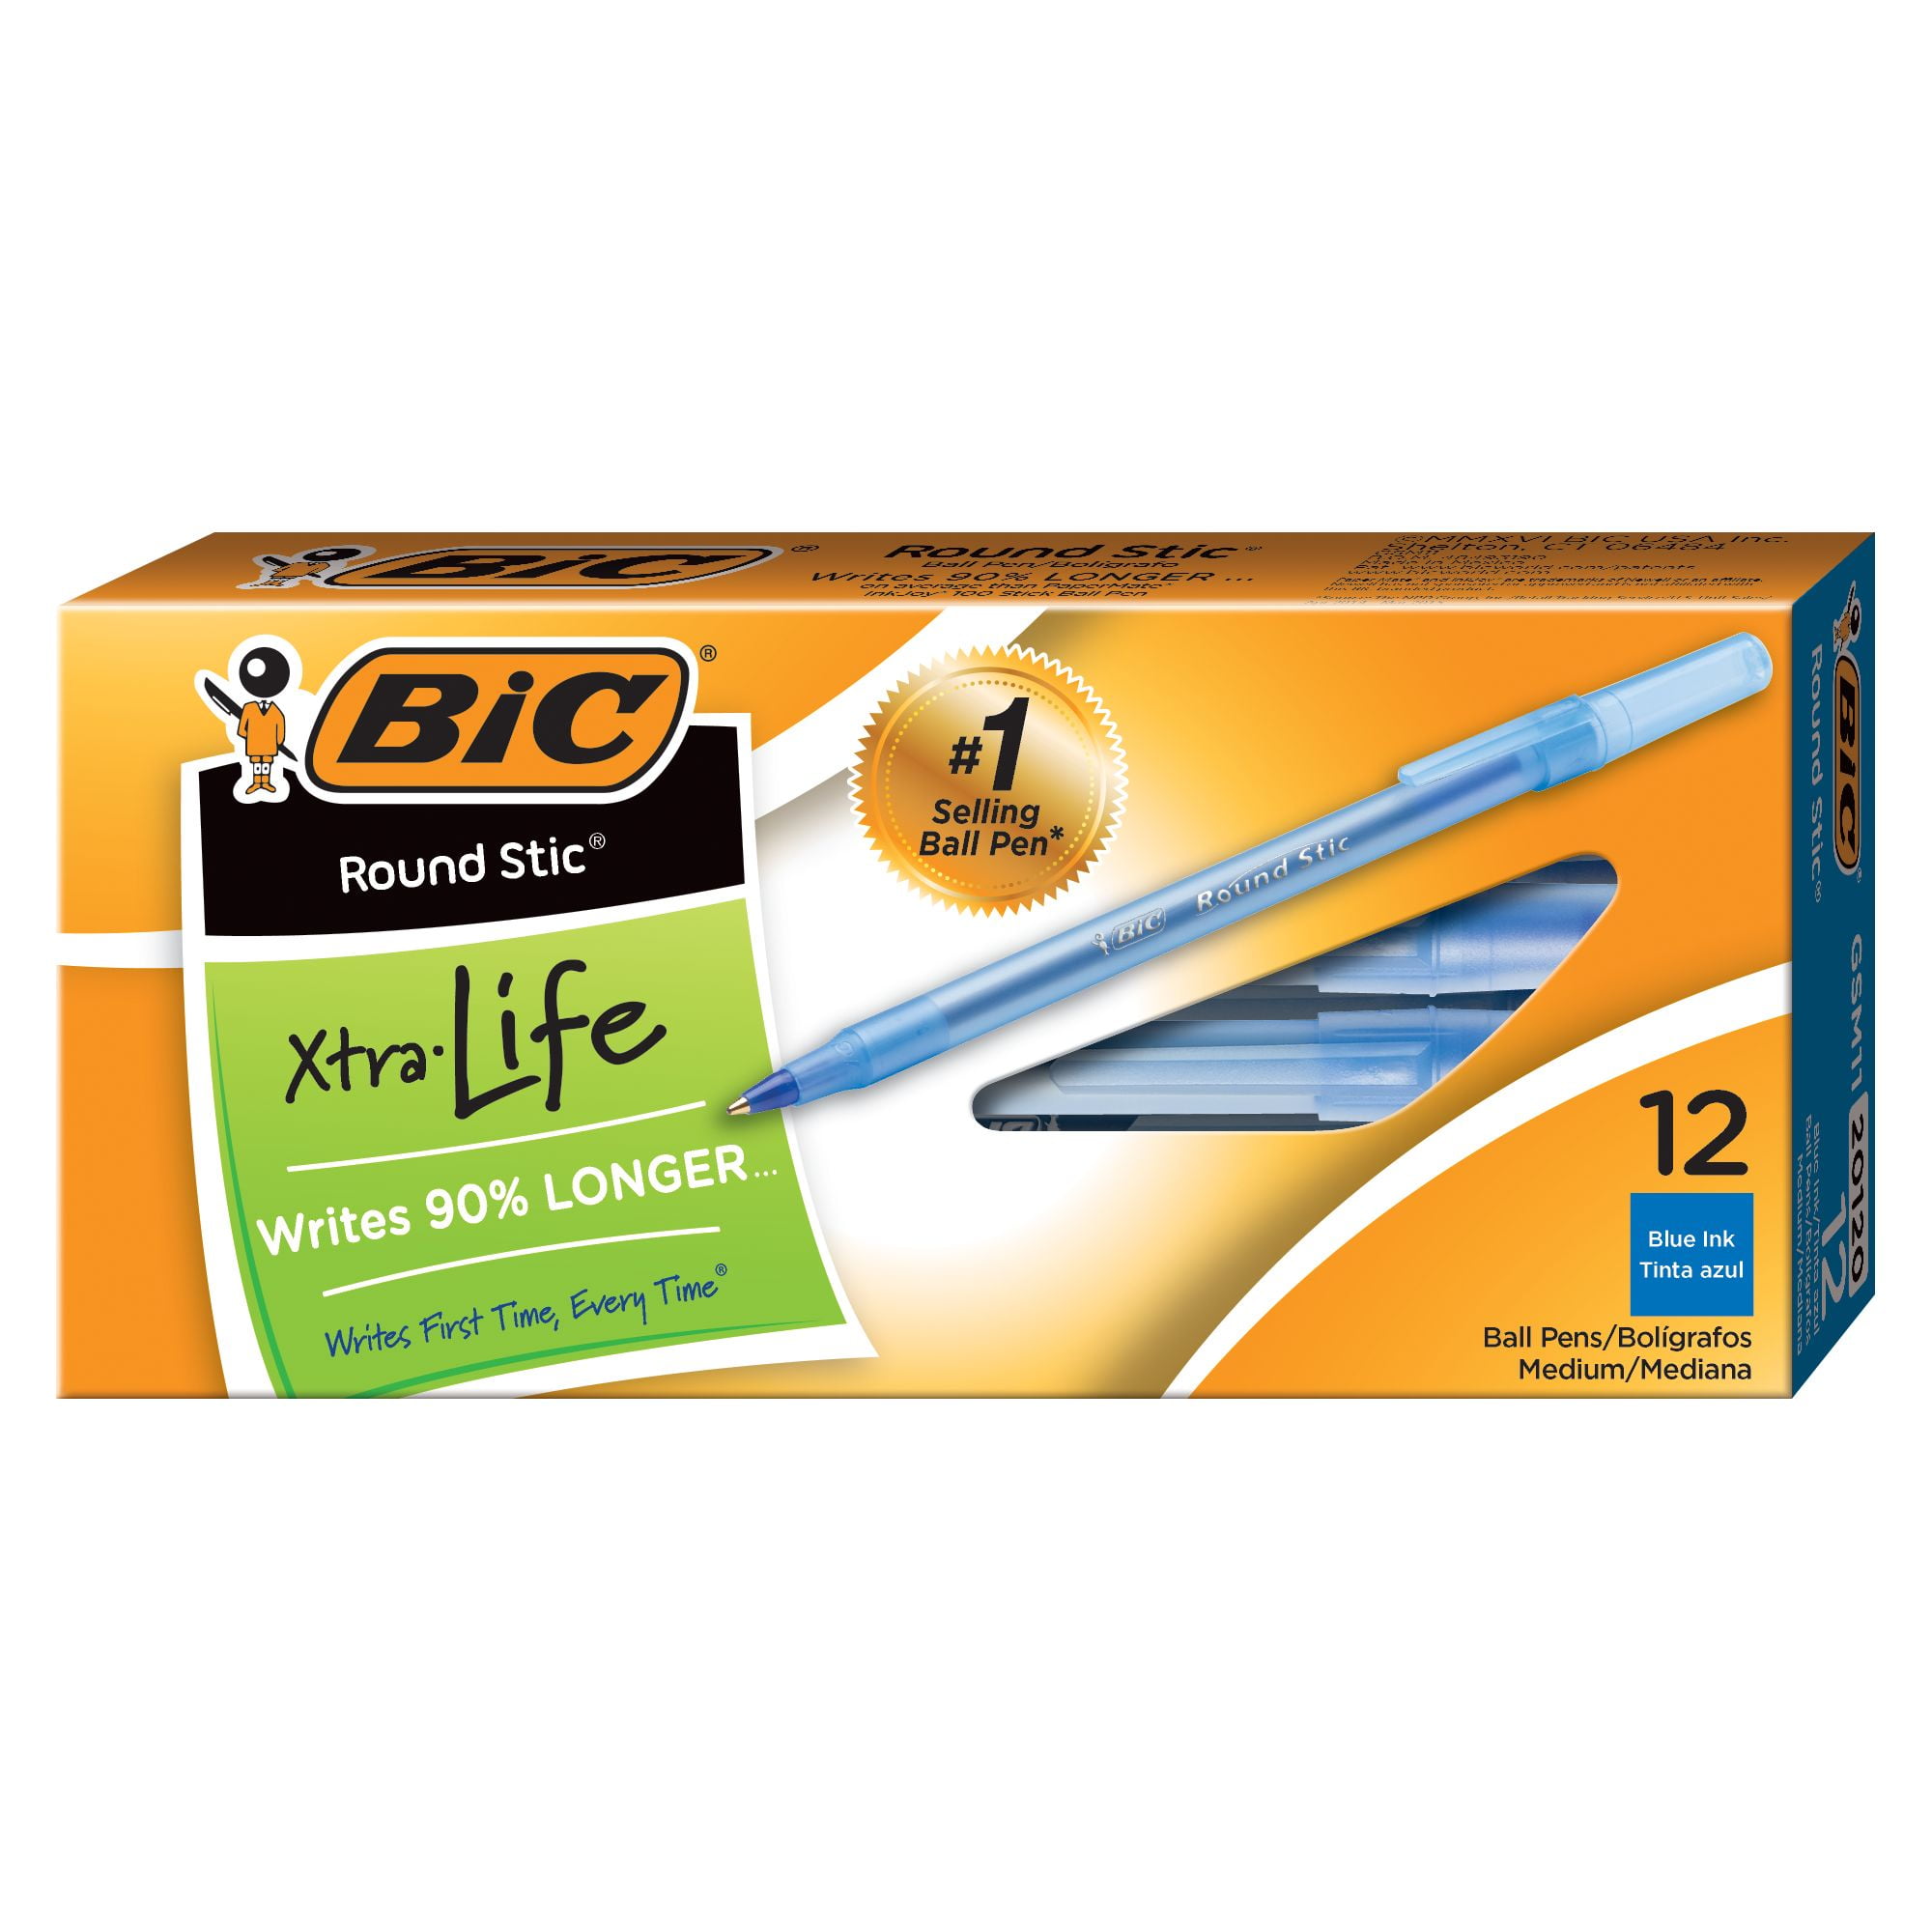 Bic Round Stic Xtra Life ballpoint red pens lot of 5 packs total 50 pens NEW 